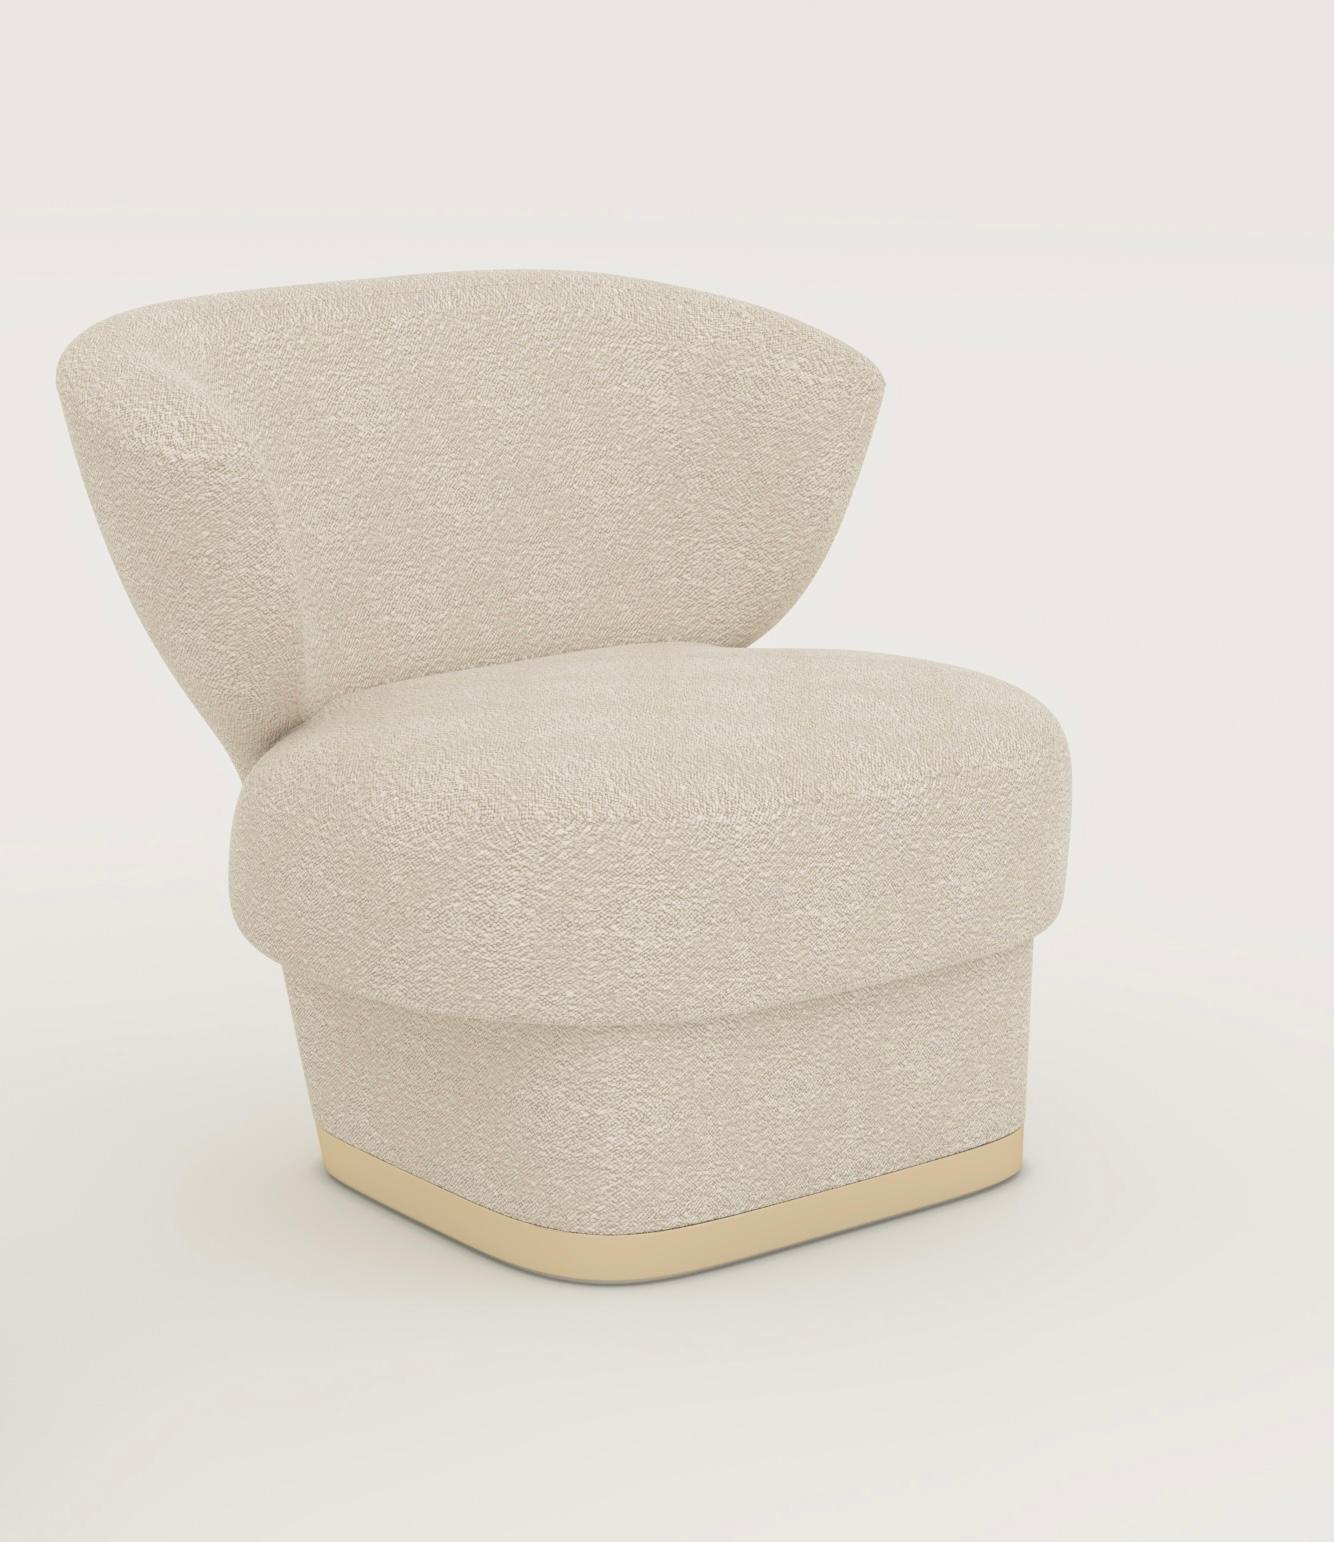 Jet Felt armchair by Jerome Bugara 
Beech frame and Karokorum foam and fabric by Dedar Milano
Base in satin brass finish
Limited edition 25
Numbered with certificate of authenticity
Made in France